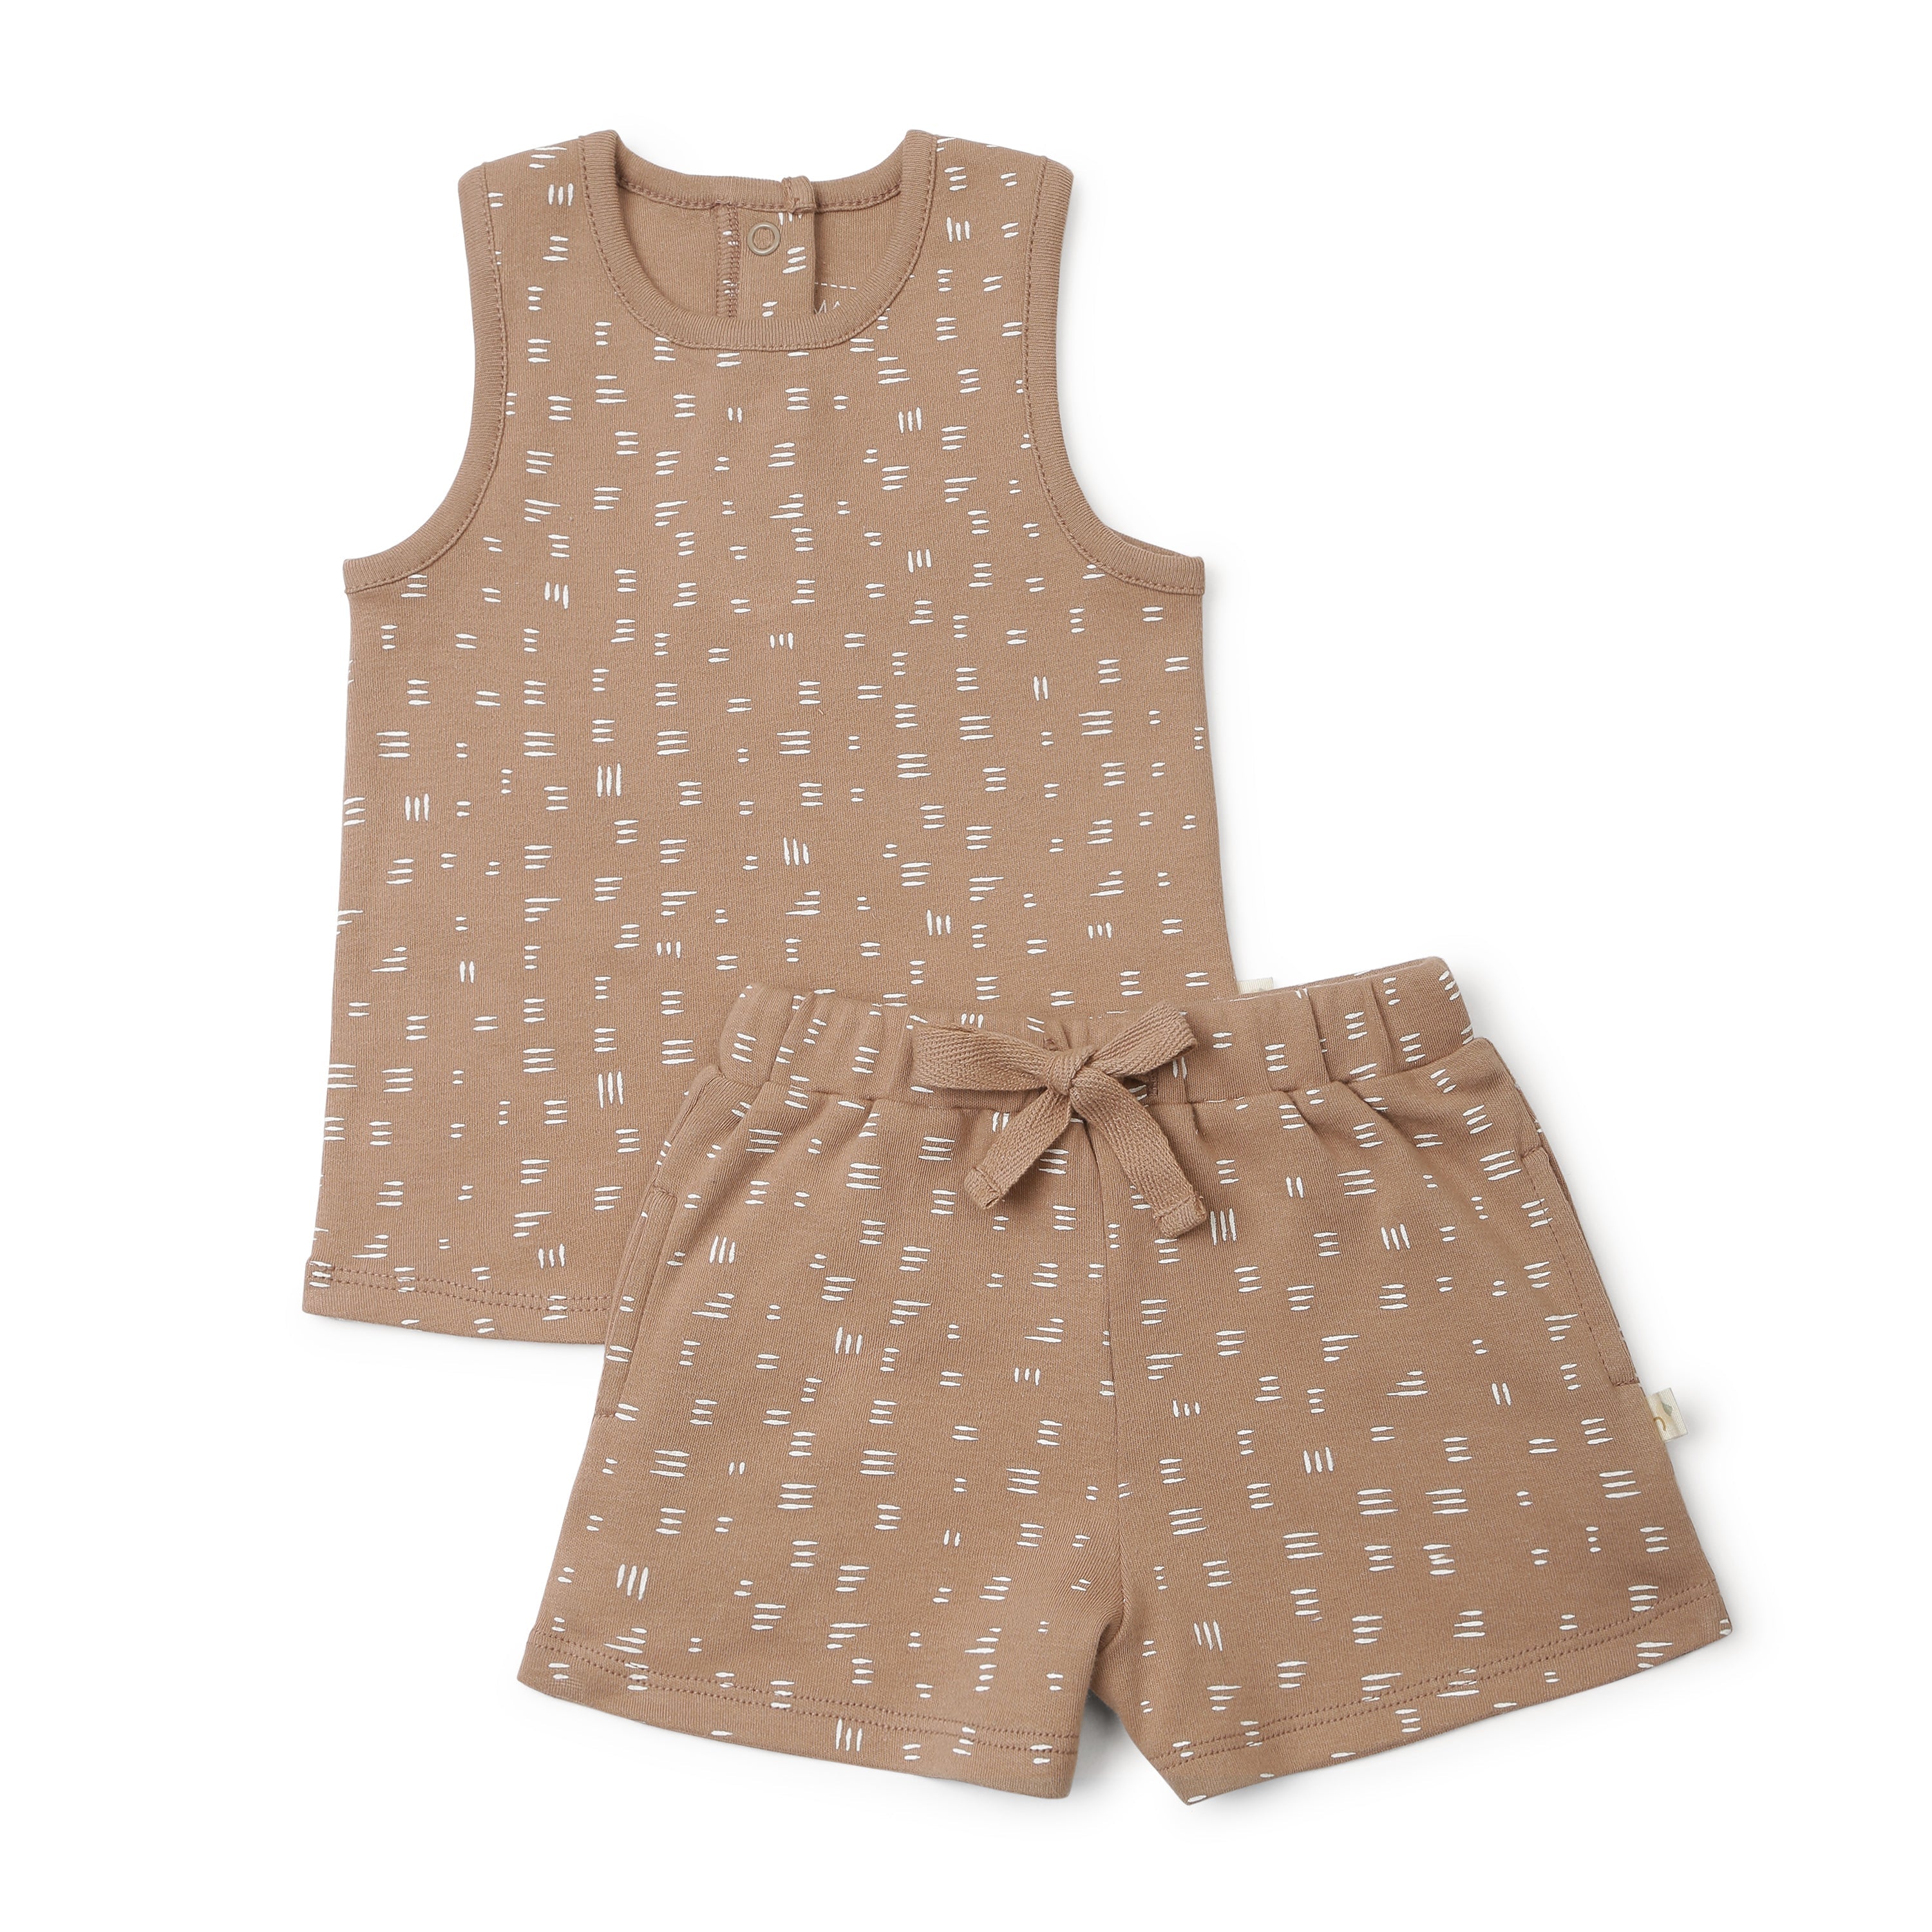 A beige sleeveless top and matching shorts with a simple white dash pattern from Organic Kids, displayed on a white background. The top has buttons at the neckline, and the shorts feature a Organic Tee & Shorts - Strokes.